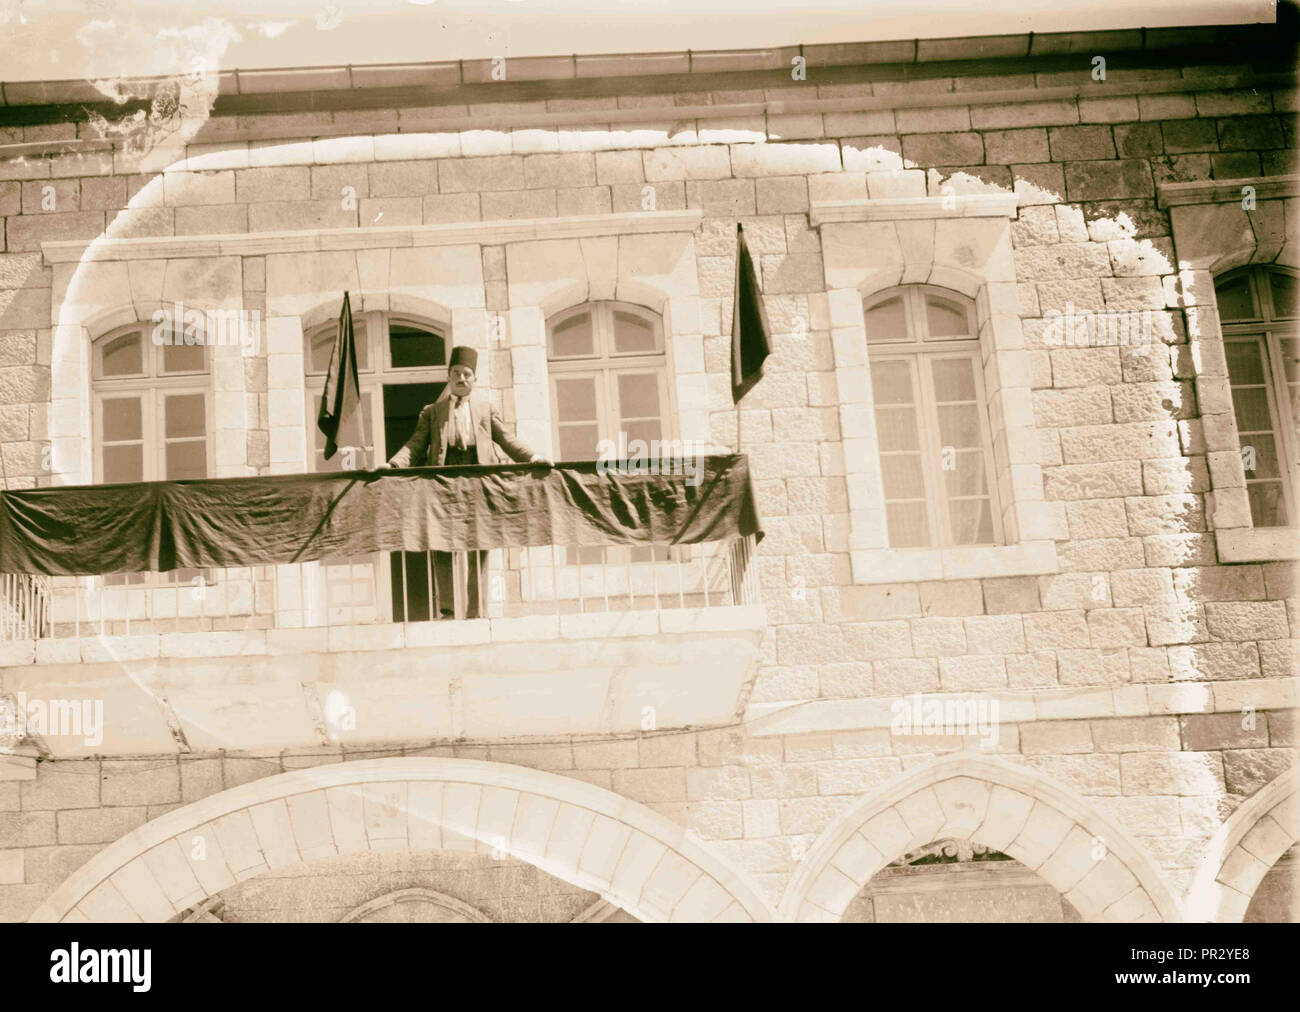 Arab protest - black flags displayed. 1925, Middle East, Israel and/or Palestine Stock Photo